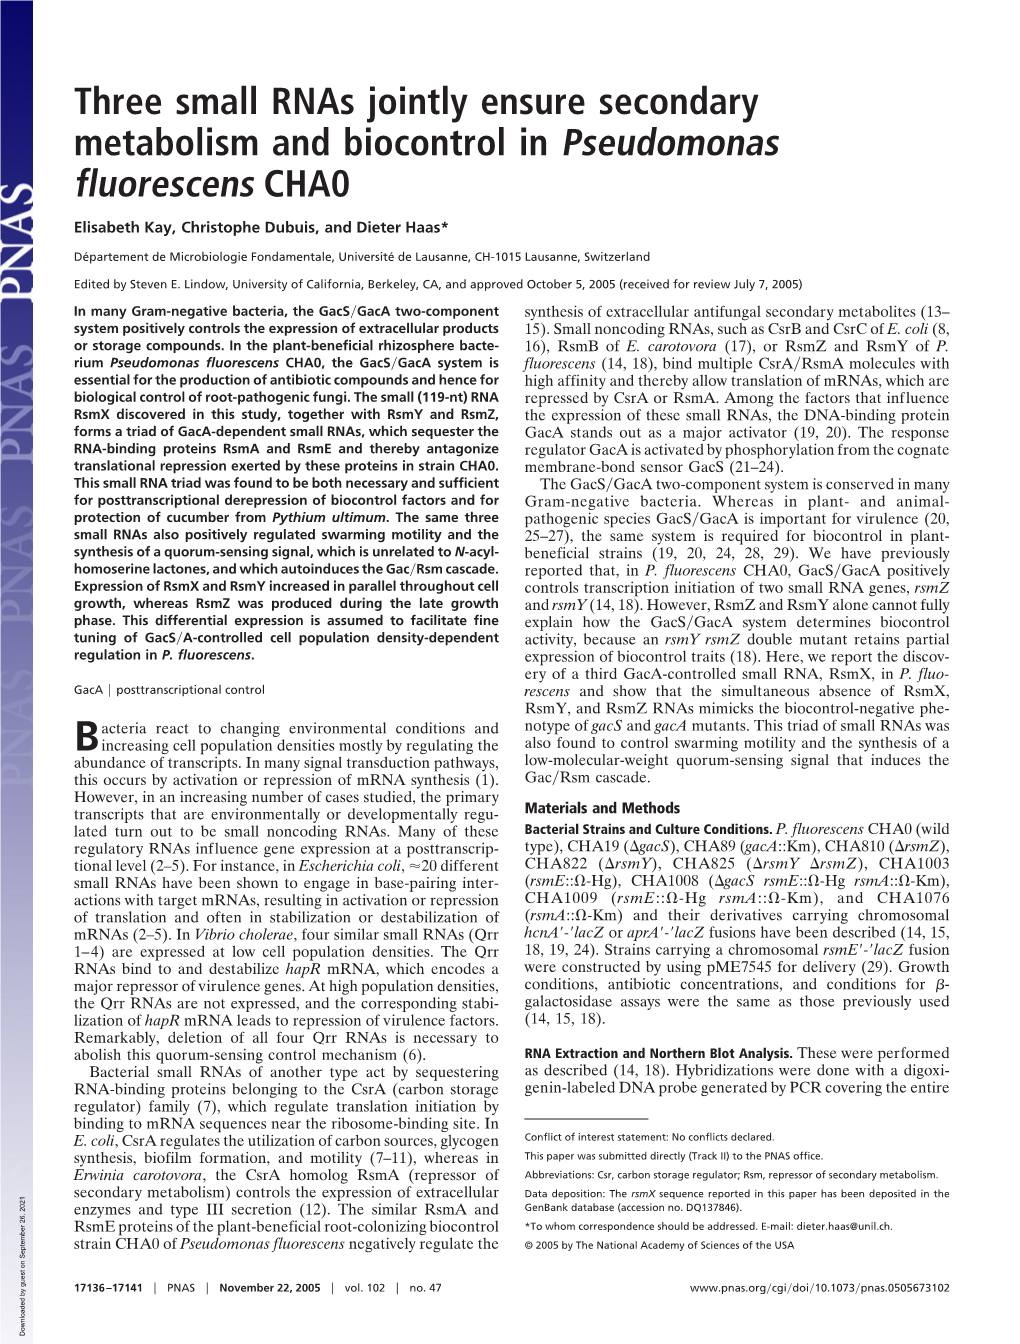 Three Small Rnas Jointly Ensure Secondary Metabolism and Biocontrol in Pseudomonas Fluorescens CHA0